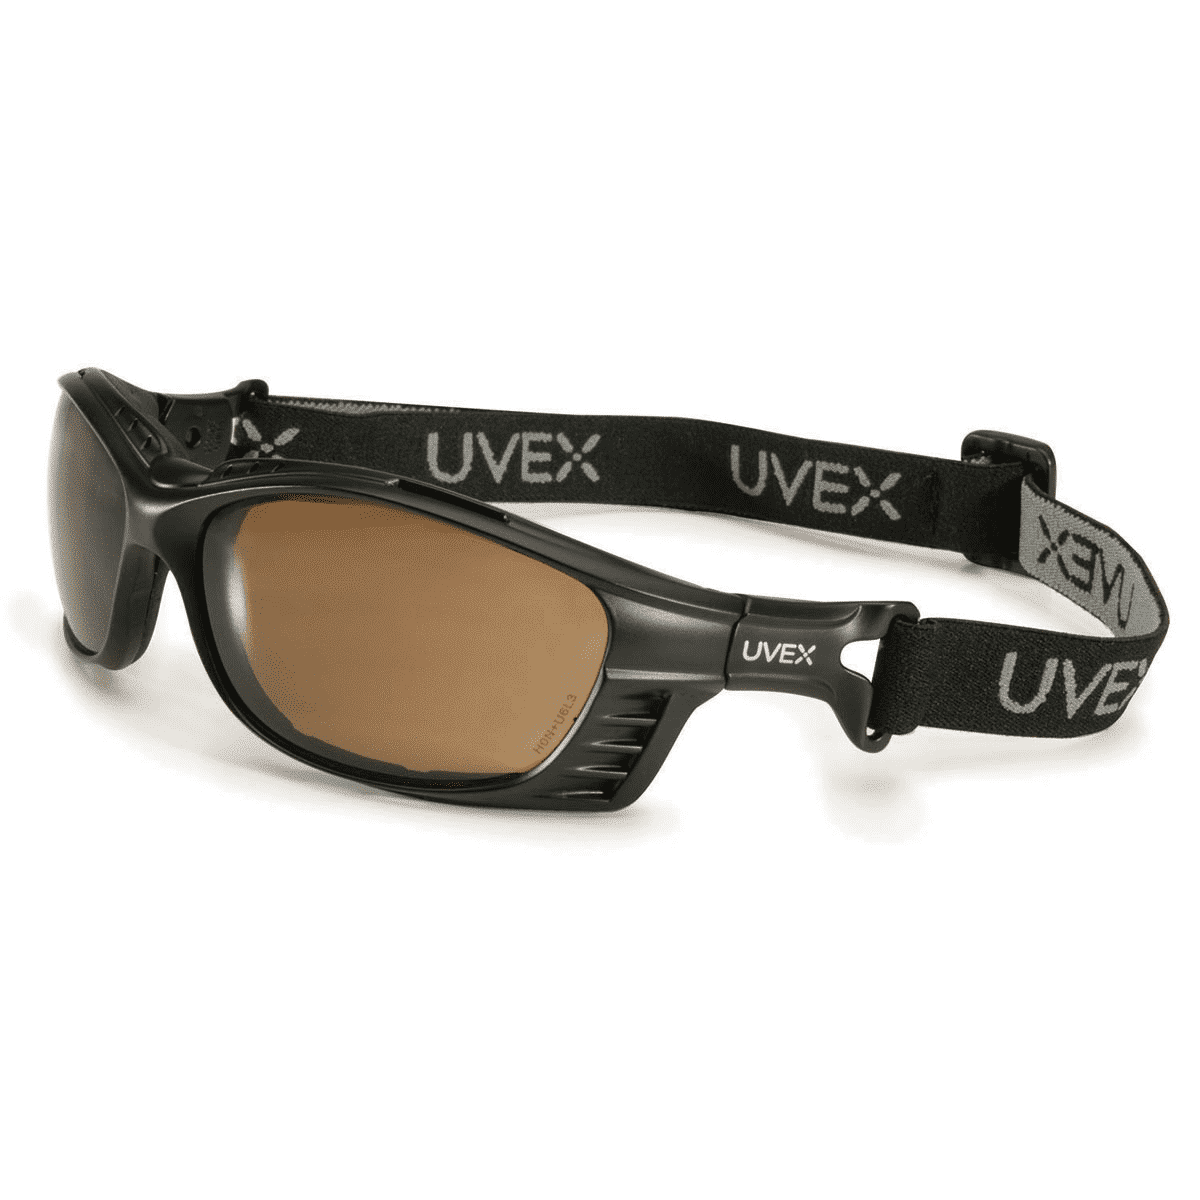 uvex 9193-376 Sportstyle Clear Lens Safety Glasses for sale online